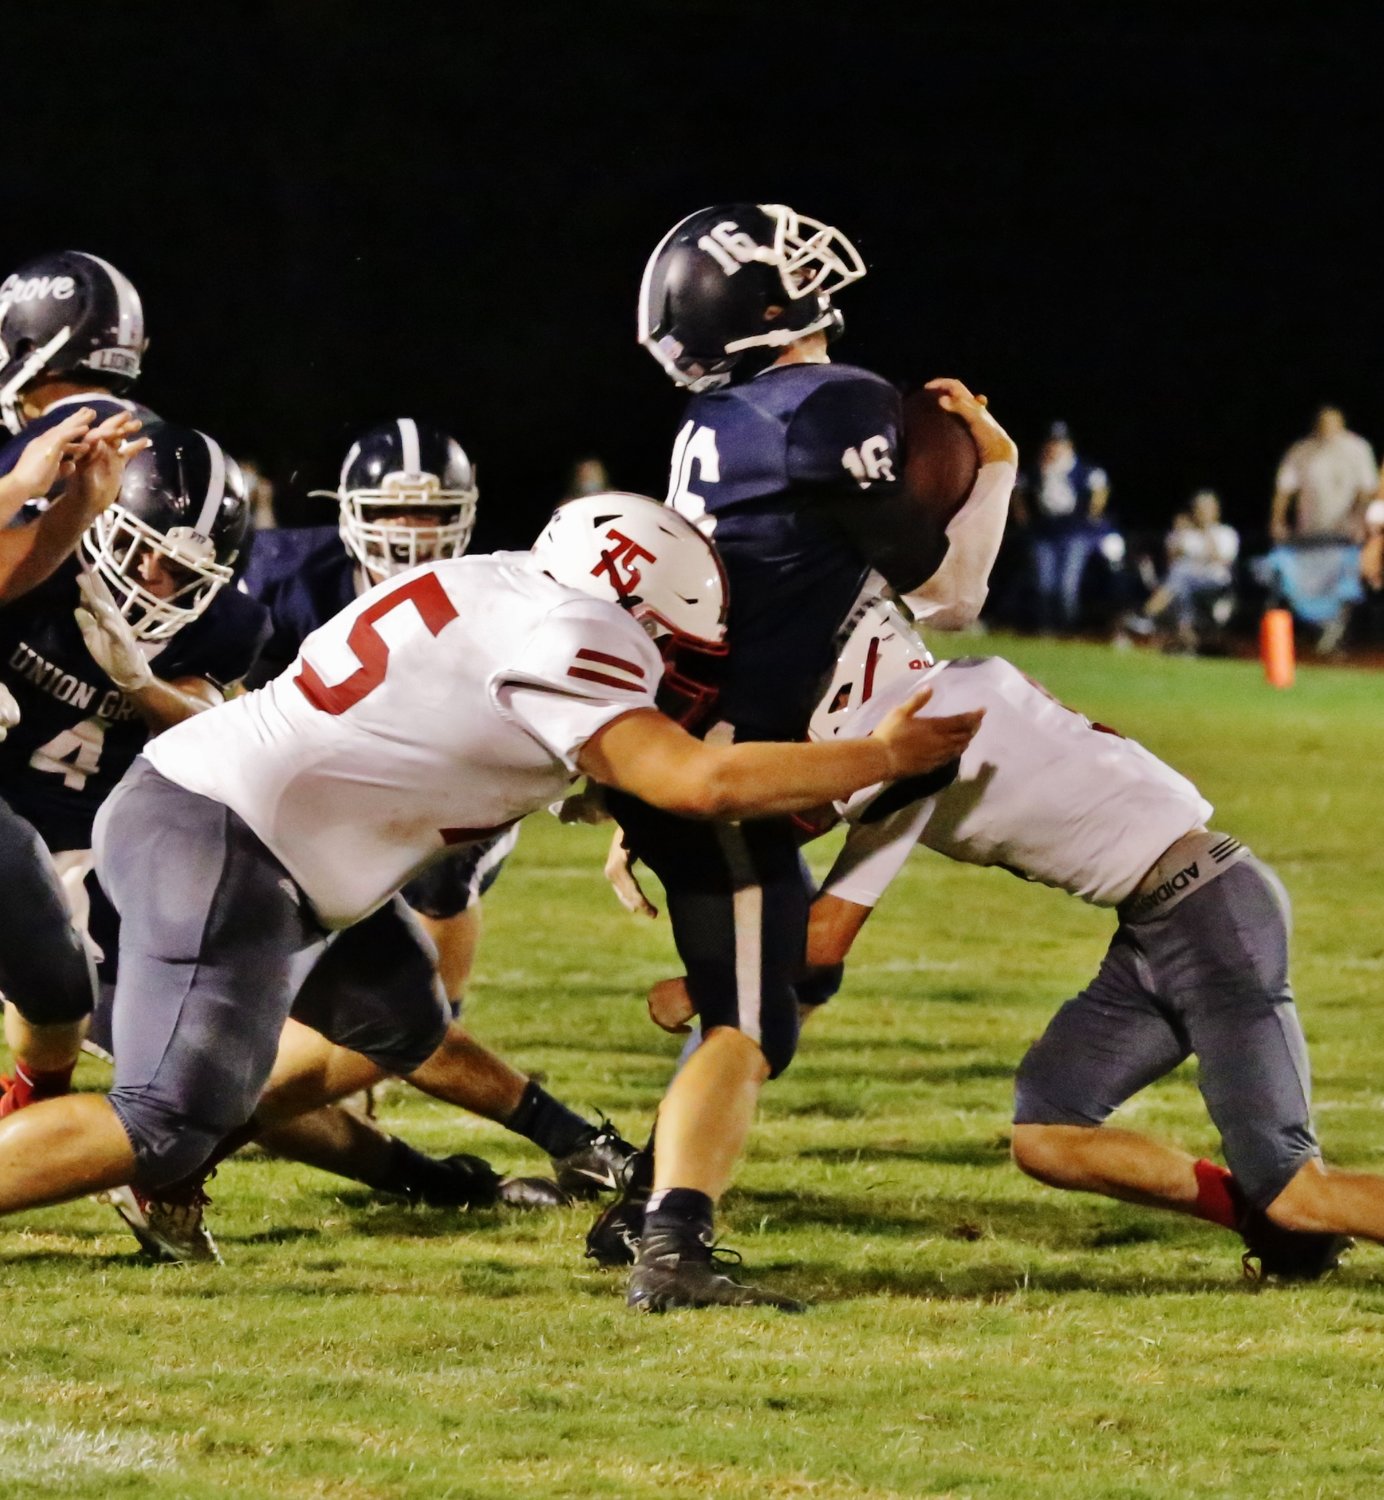 Alba-Golden’s Jayden Green (left) and Caleb Anderson crunch a Union Grove ball carrier. (Monitor photo by John Arbter)